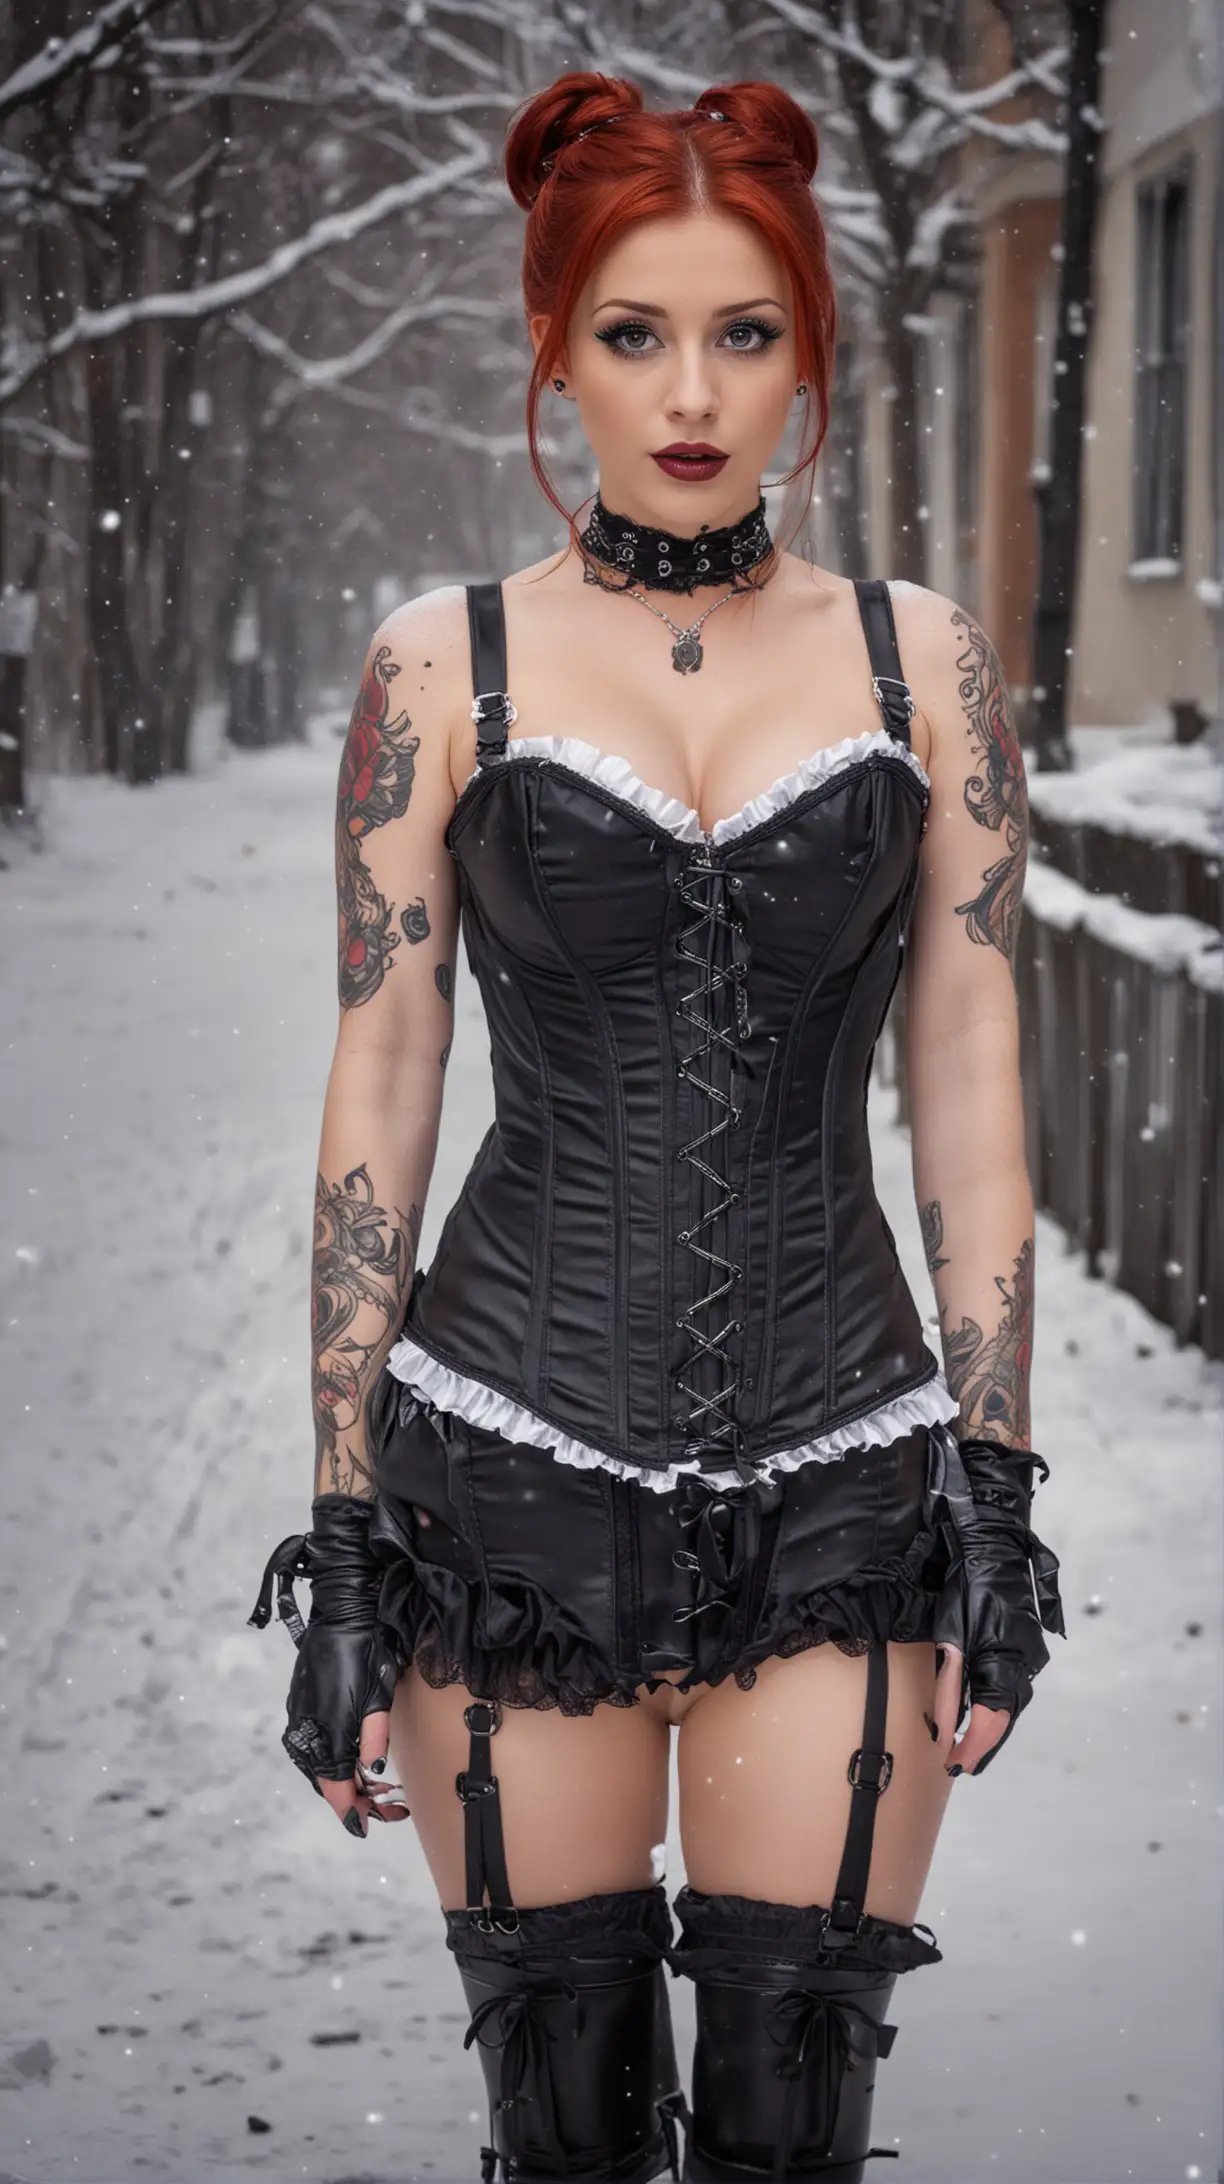 Redhead Woman in Snowy Street with Corset Bodysuit and Stockings